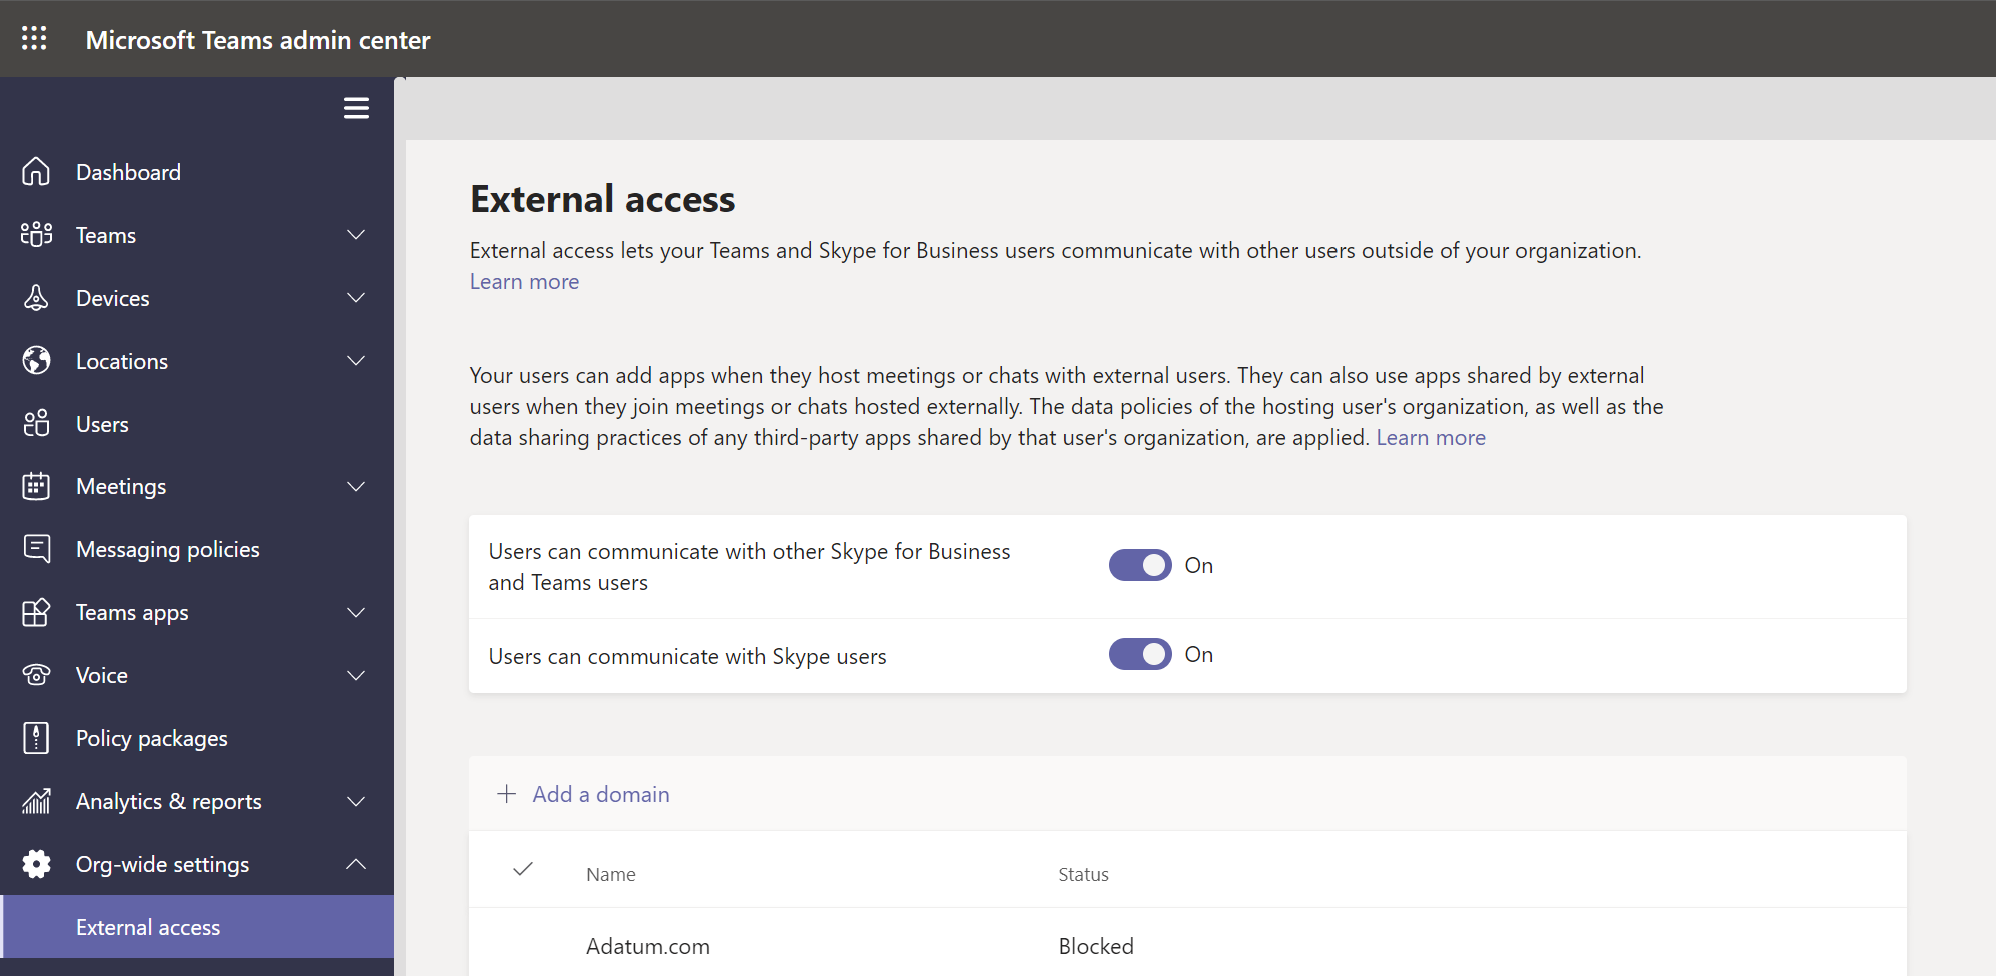 A screenshot displays the External access page on the Org-wide settings. All settings are enabled. The administrator has blocked access with Adatum.com domain.